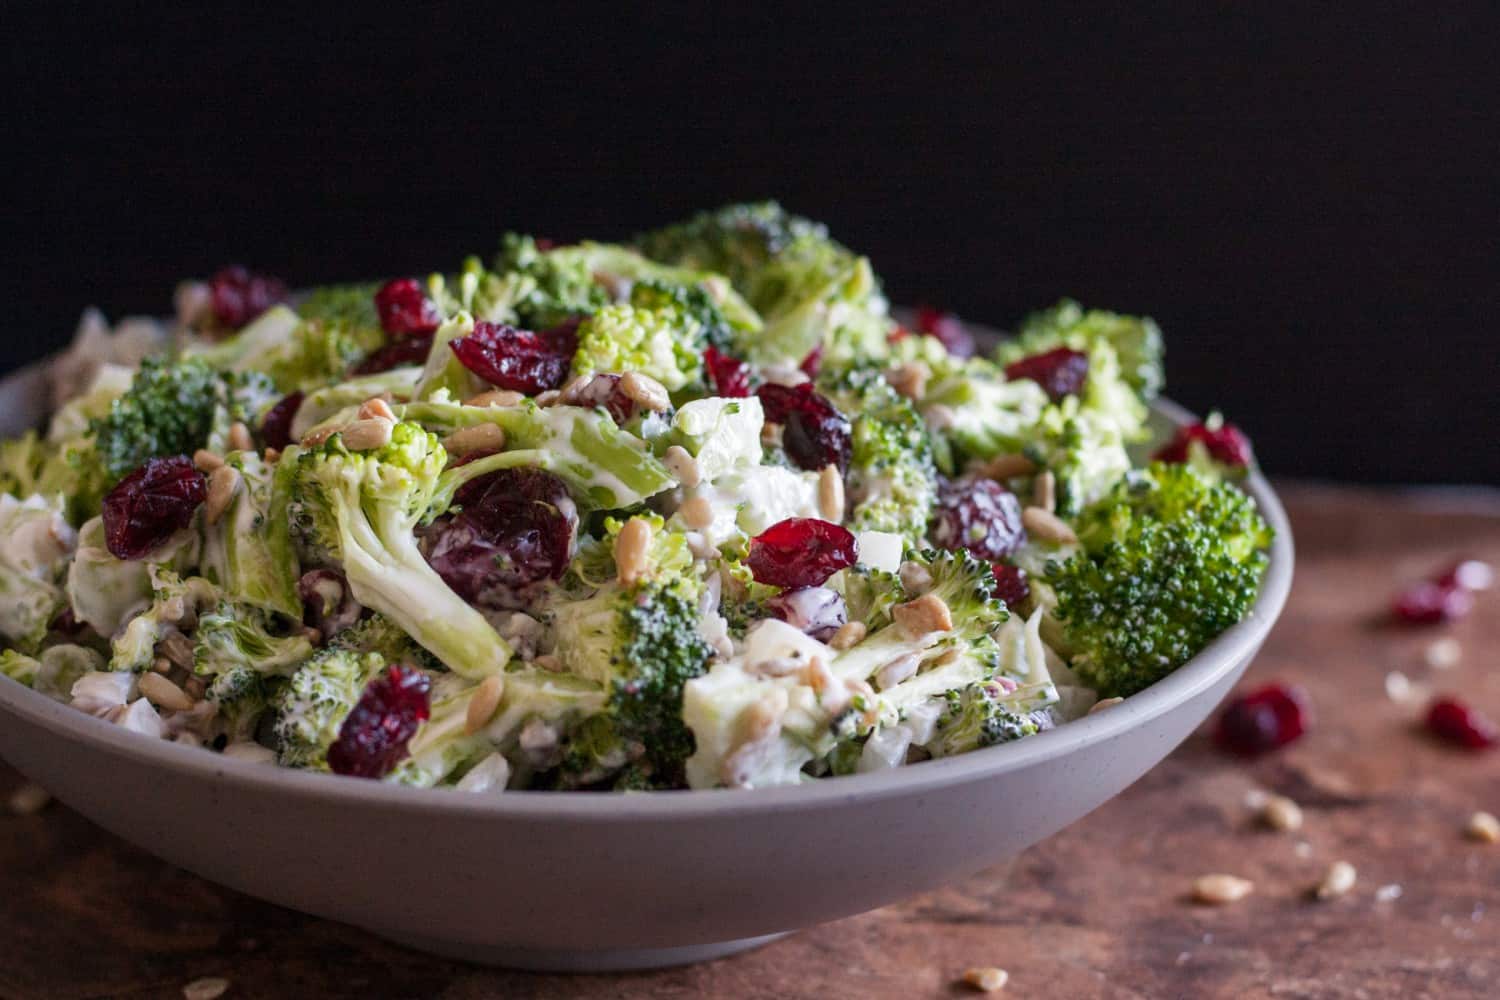 Creamy crunchy sweet and salty, this broccoli salad is always a hit! Get the recipe on GoodieGodmother.com